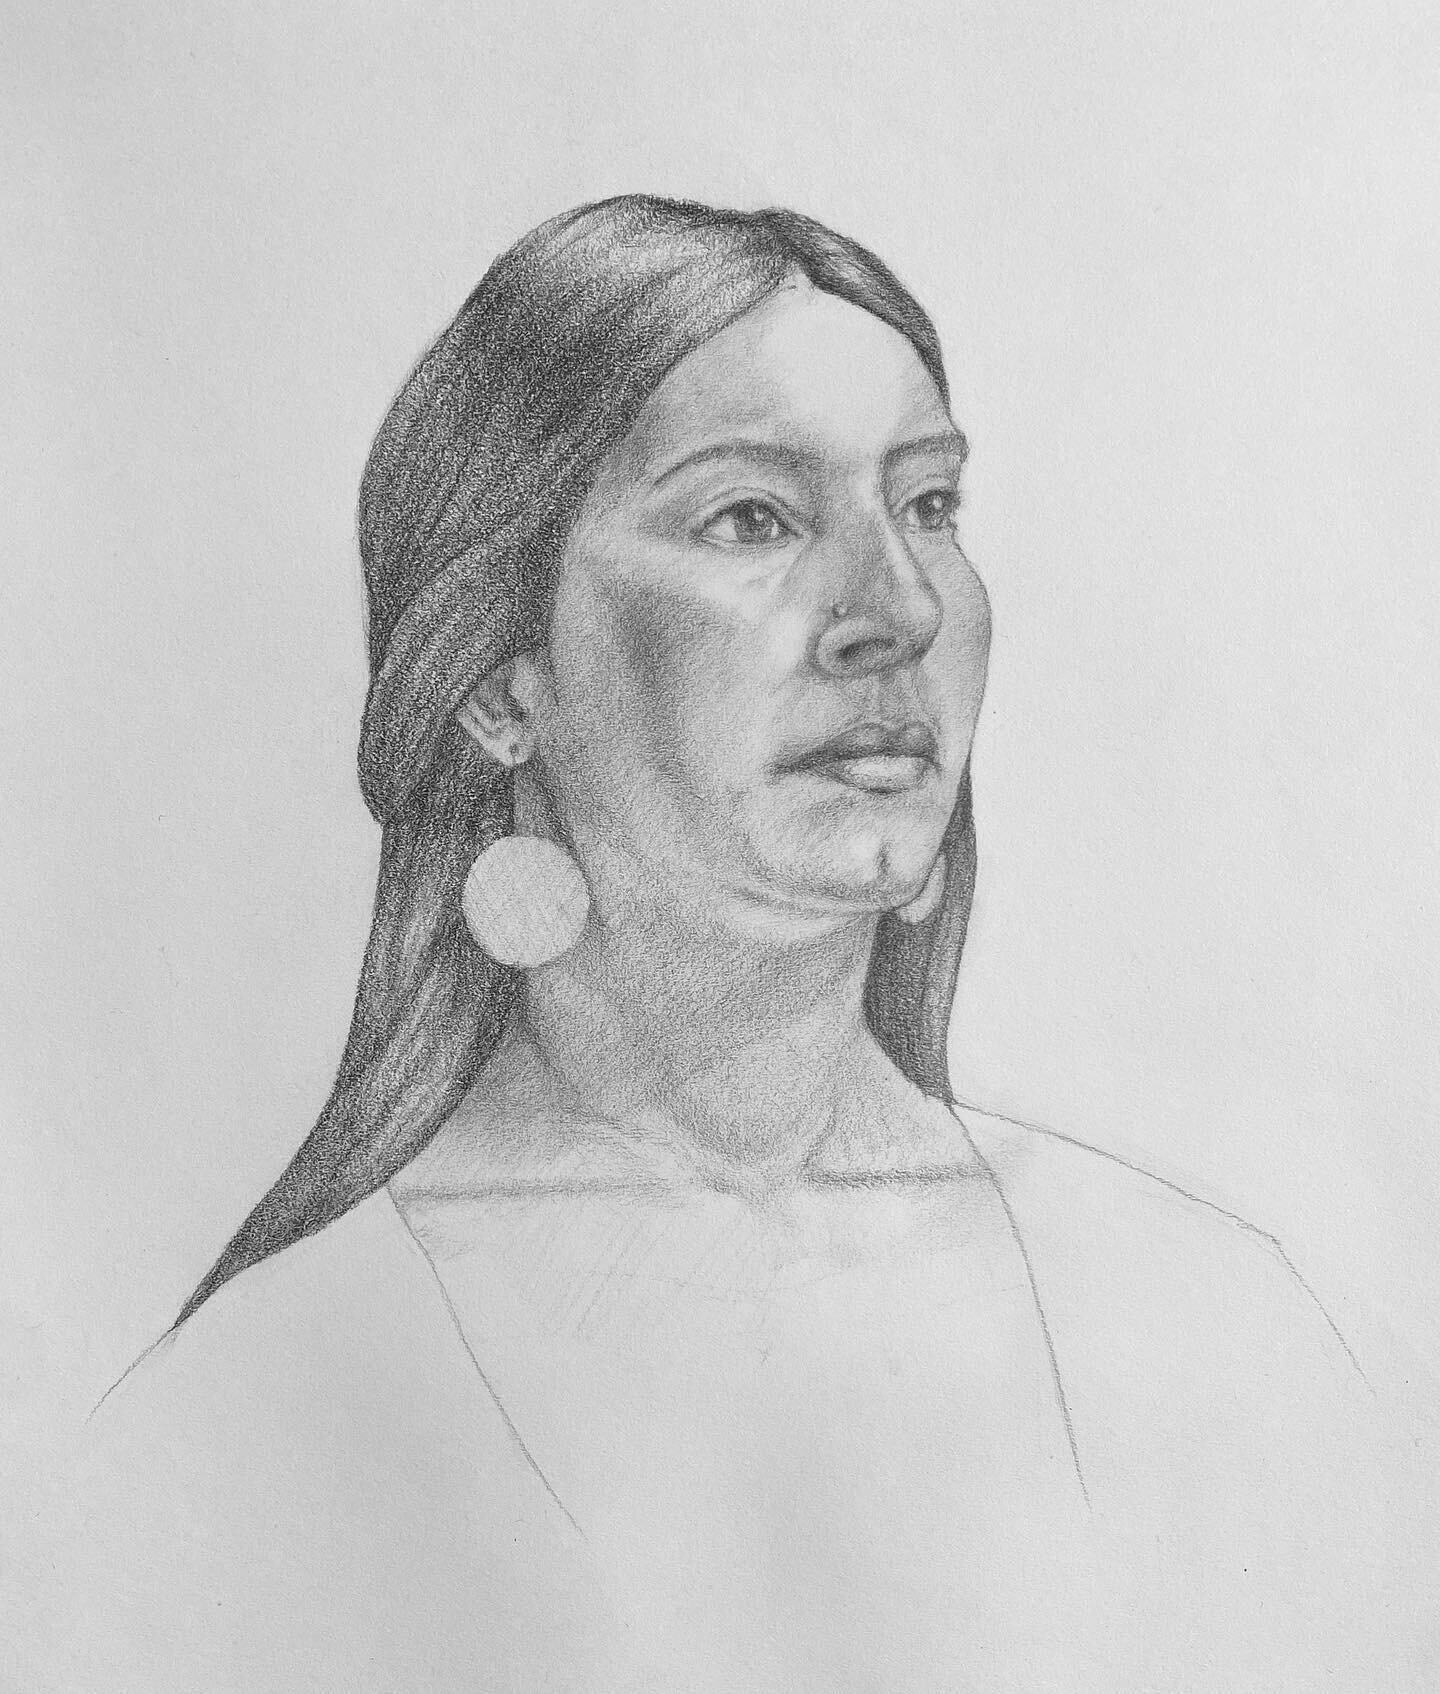 Pencil portrait from a course I took in Santa Fe last year. I&rsquo;ll be back in New Mexico until May to learn some more ✨we will temporarily pause taking on new custom projects, but will continue processing orders placed online 🤍
-
#xitlallimade #